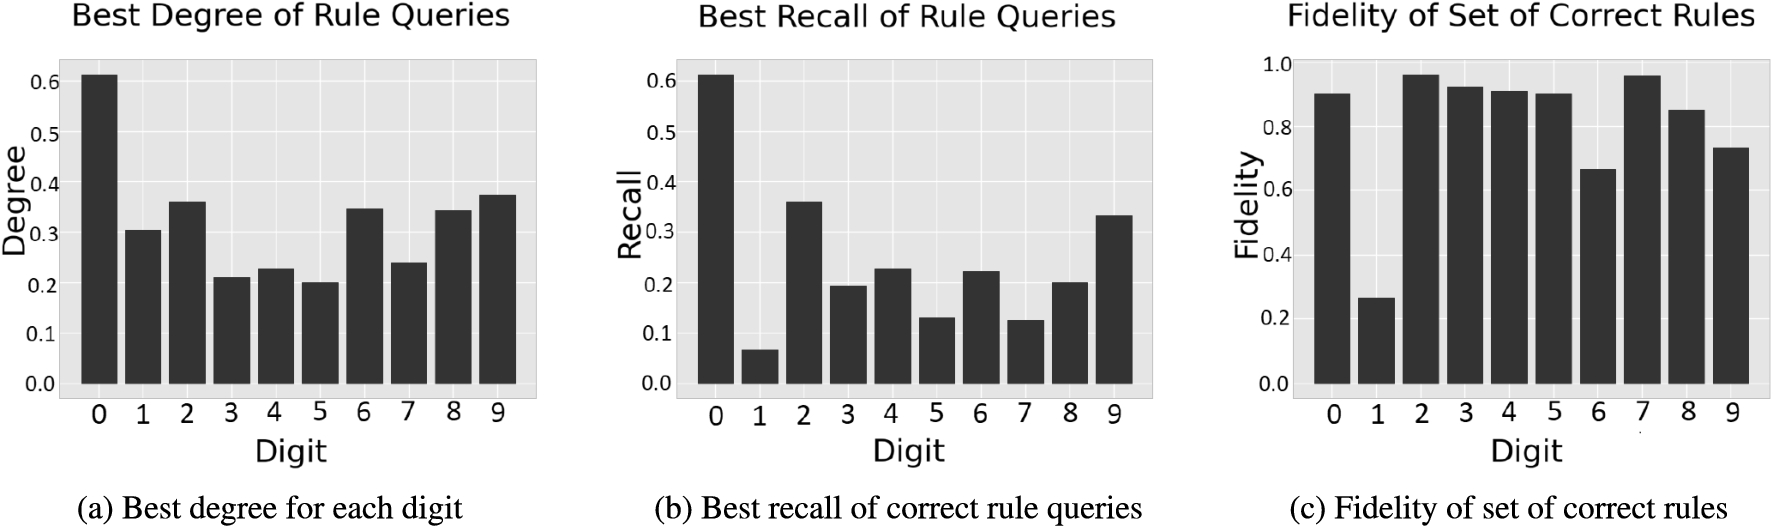 Metrics of generated rule queries for MNIST.